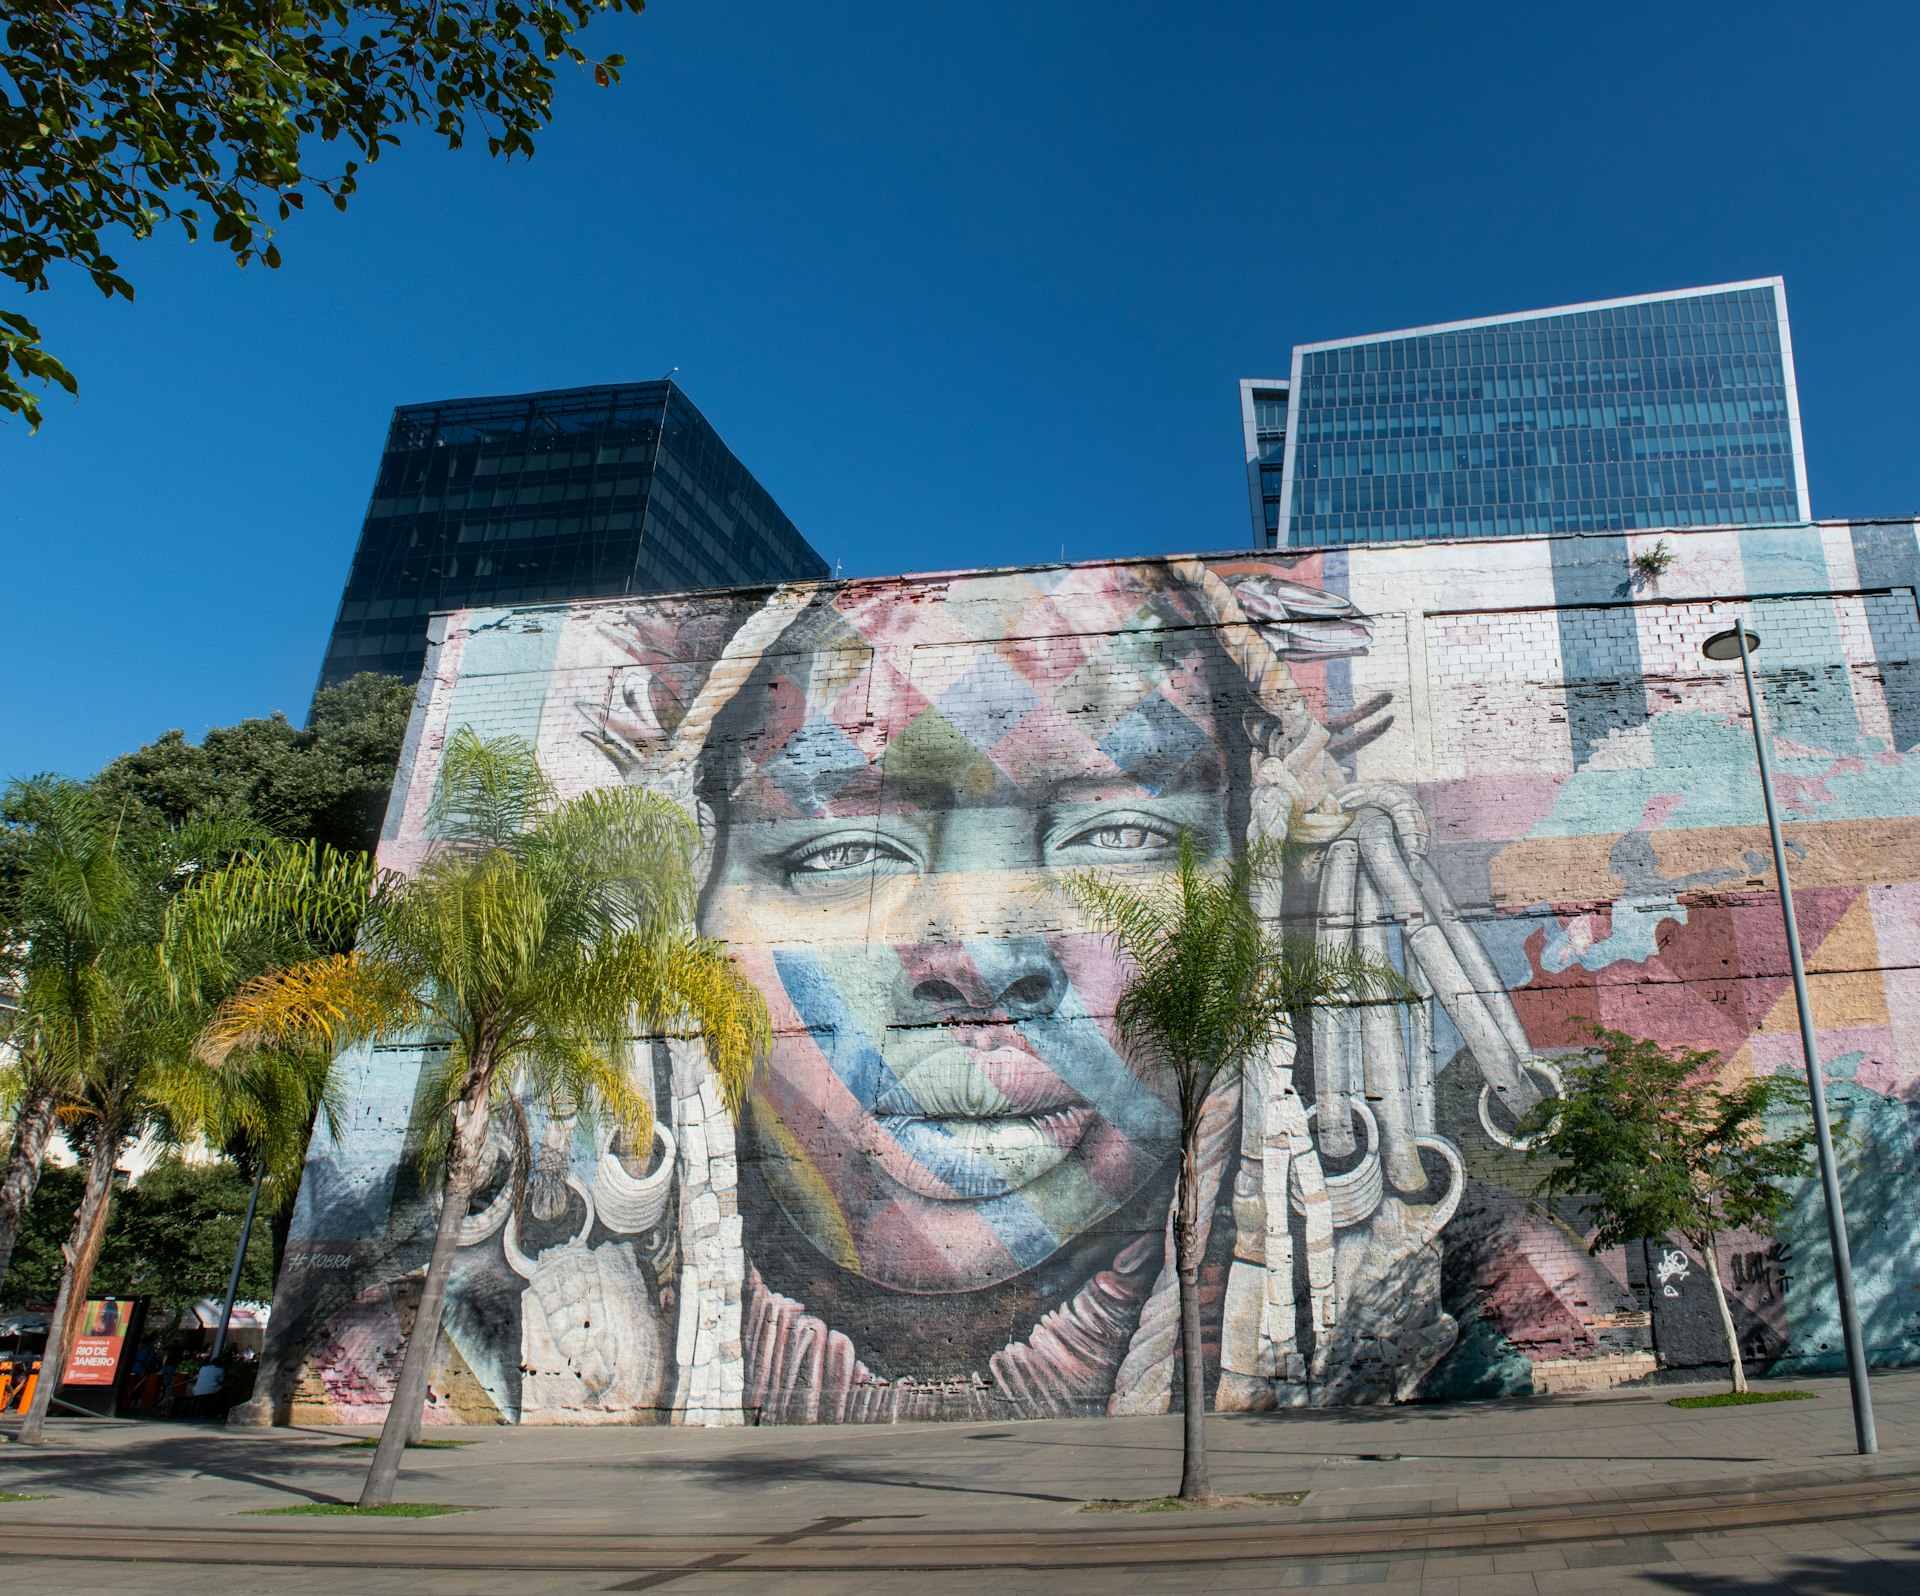 A mural of a woman's face fills the whole side of a building